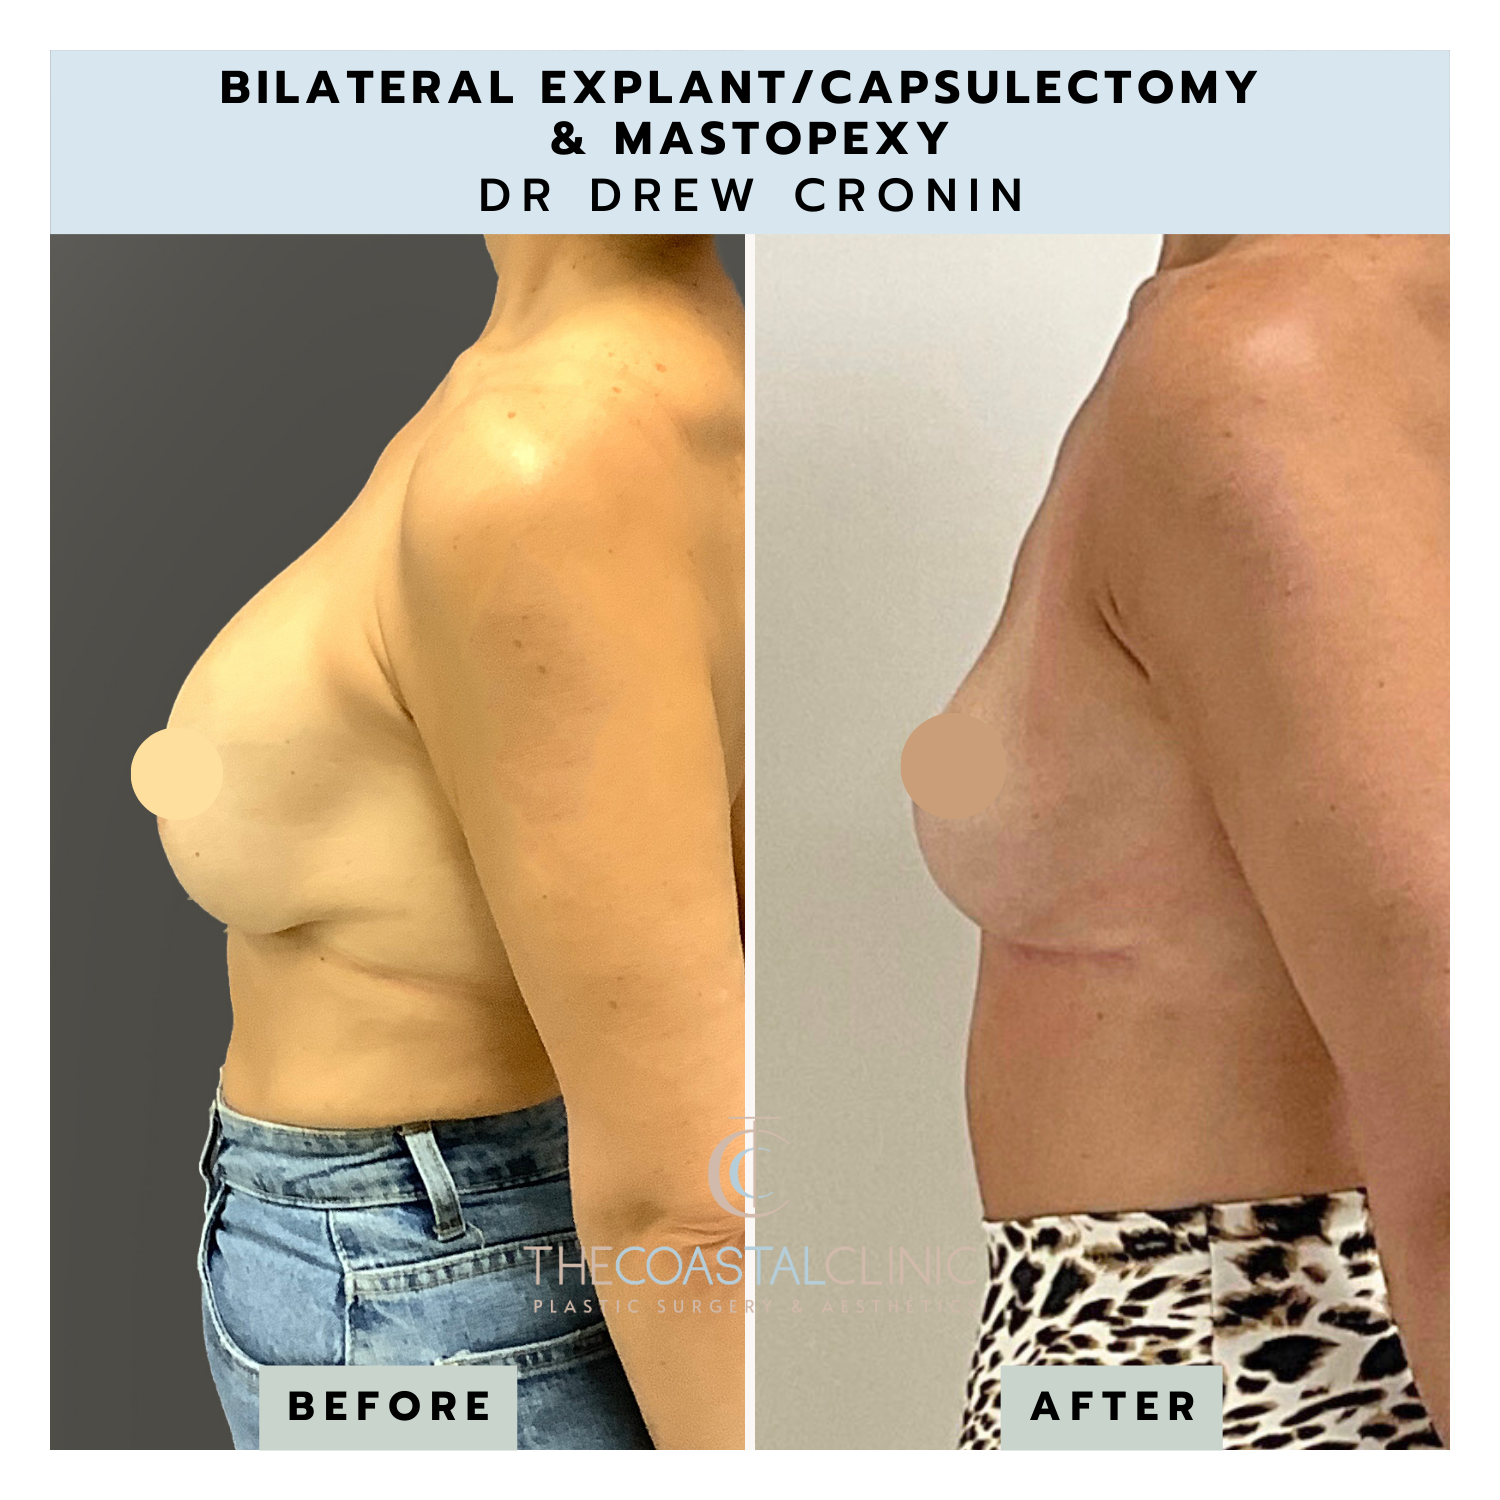 Bilateral Explant - The Coastal Clinic Plastic Surgery and